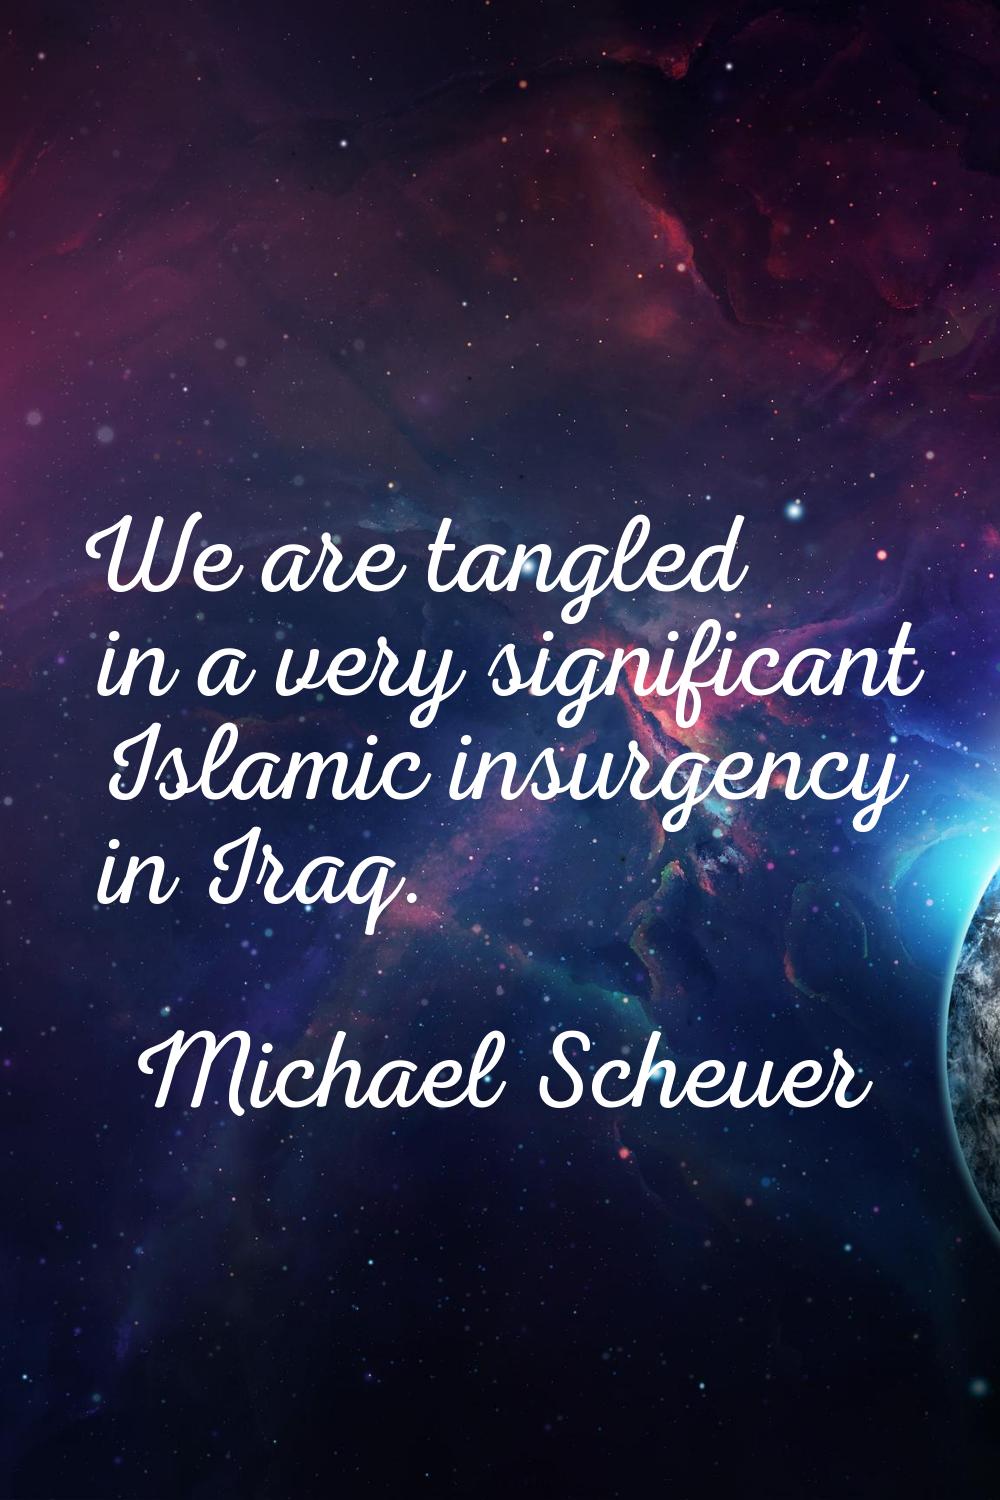 We are tangled in a very significant Islamic insurgency in Iraq.